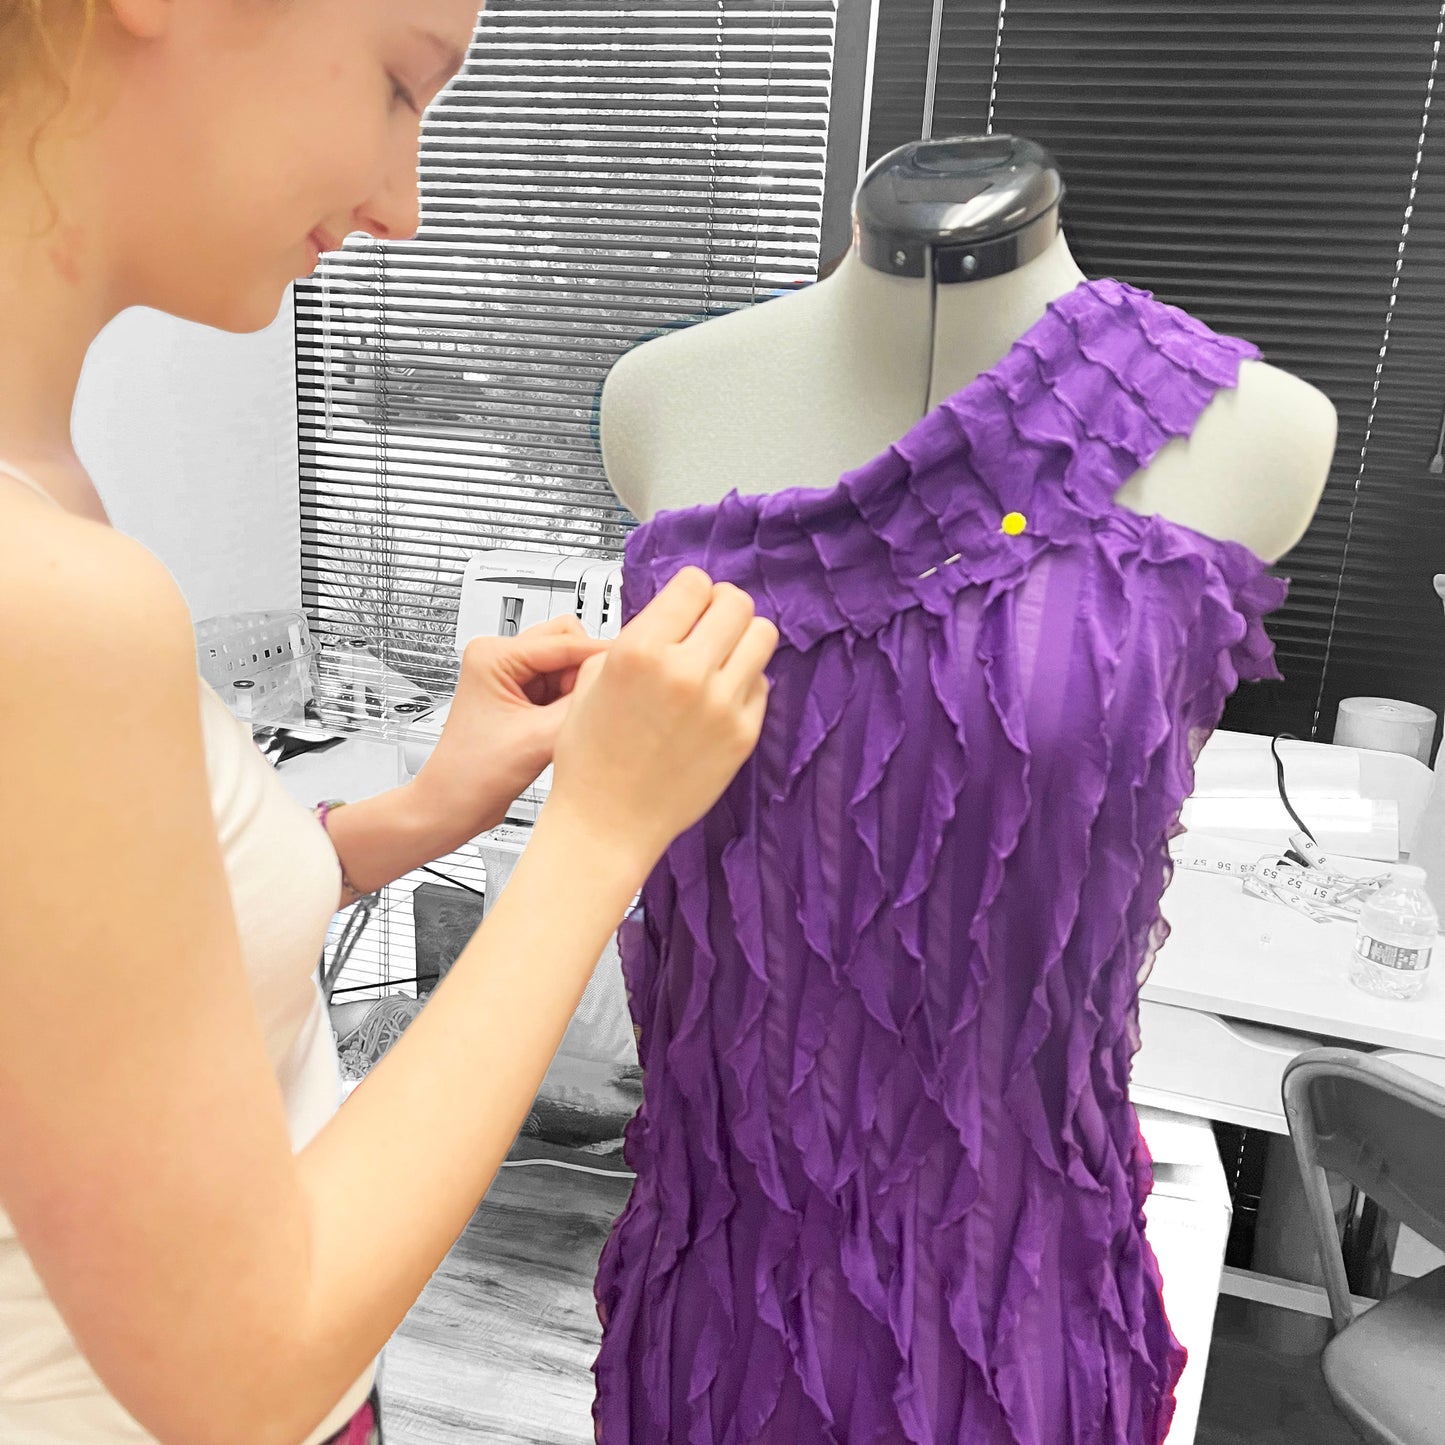 Advanced Sewing and Clothing Design Class